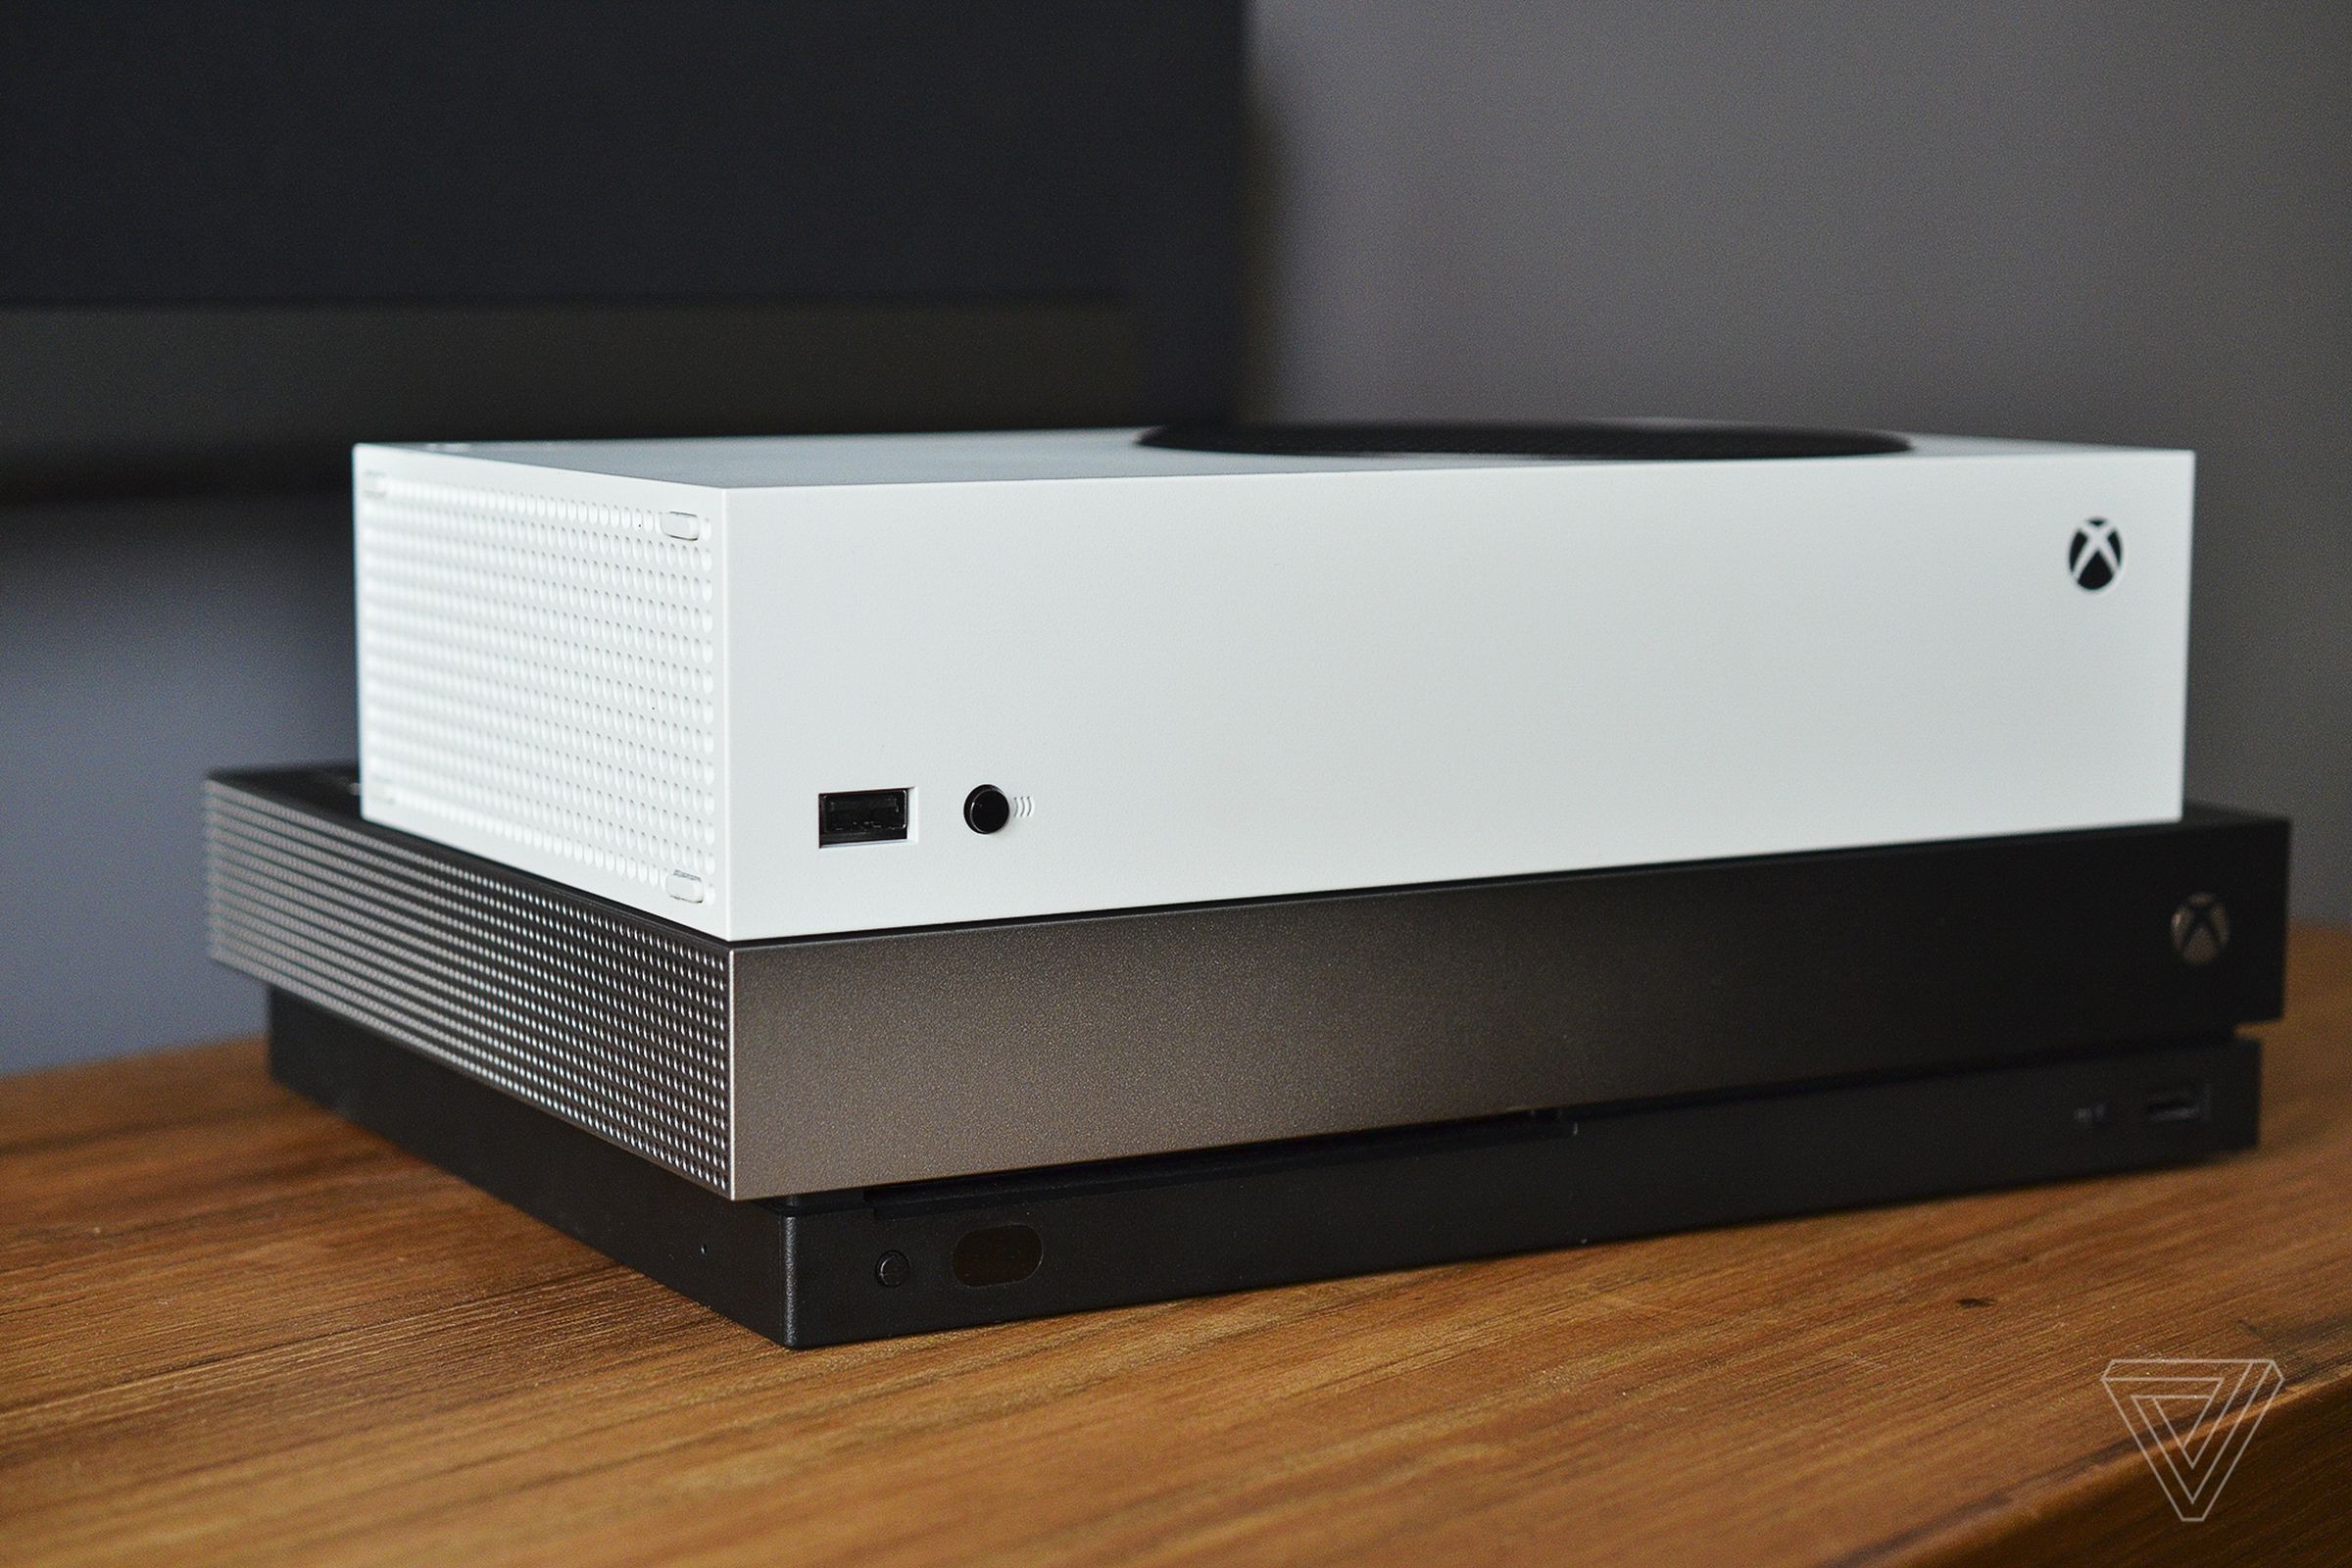 The Xbox Series X on top of an Xbox One X.